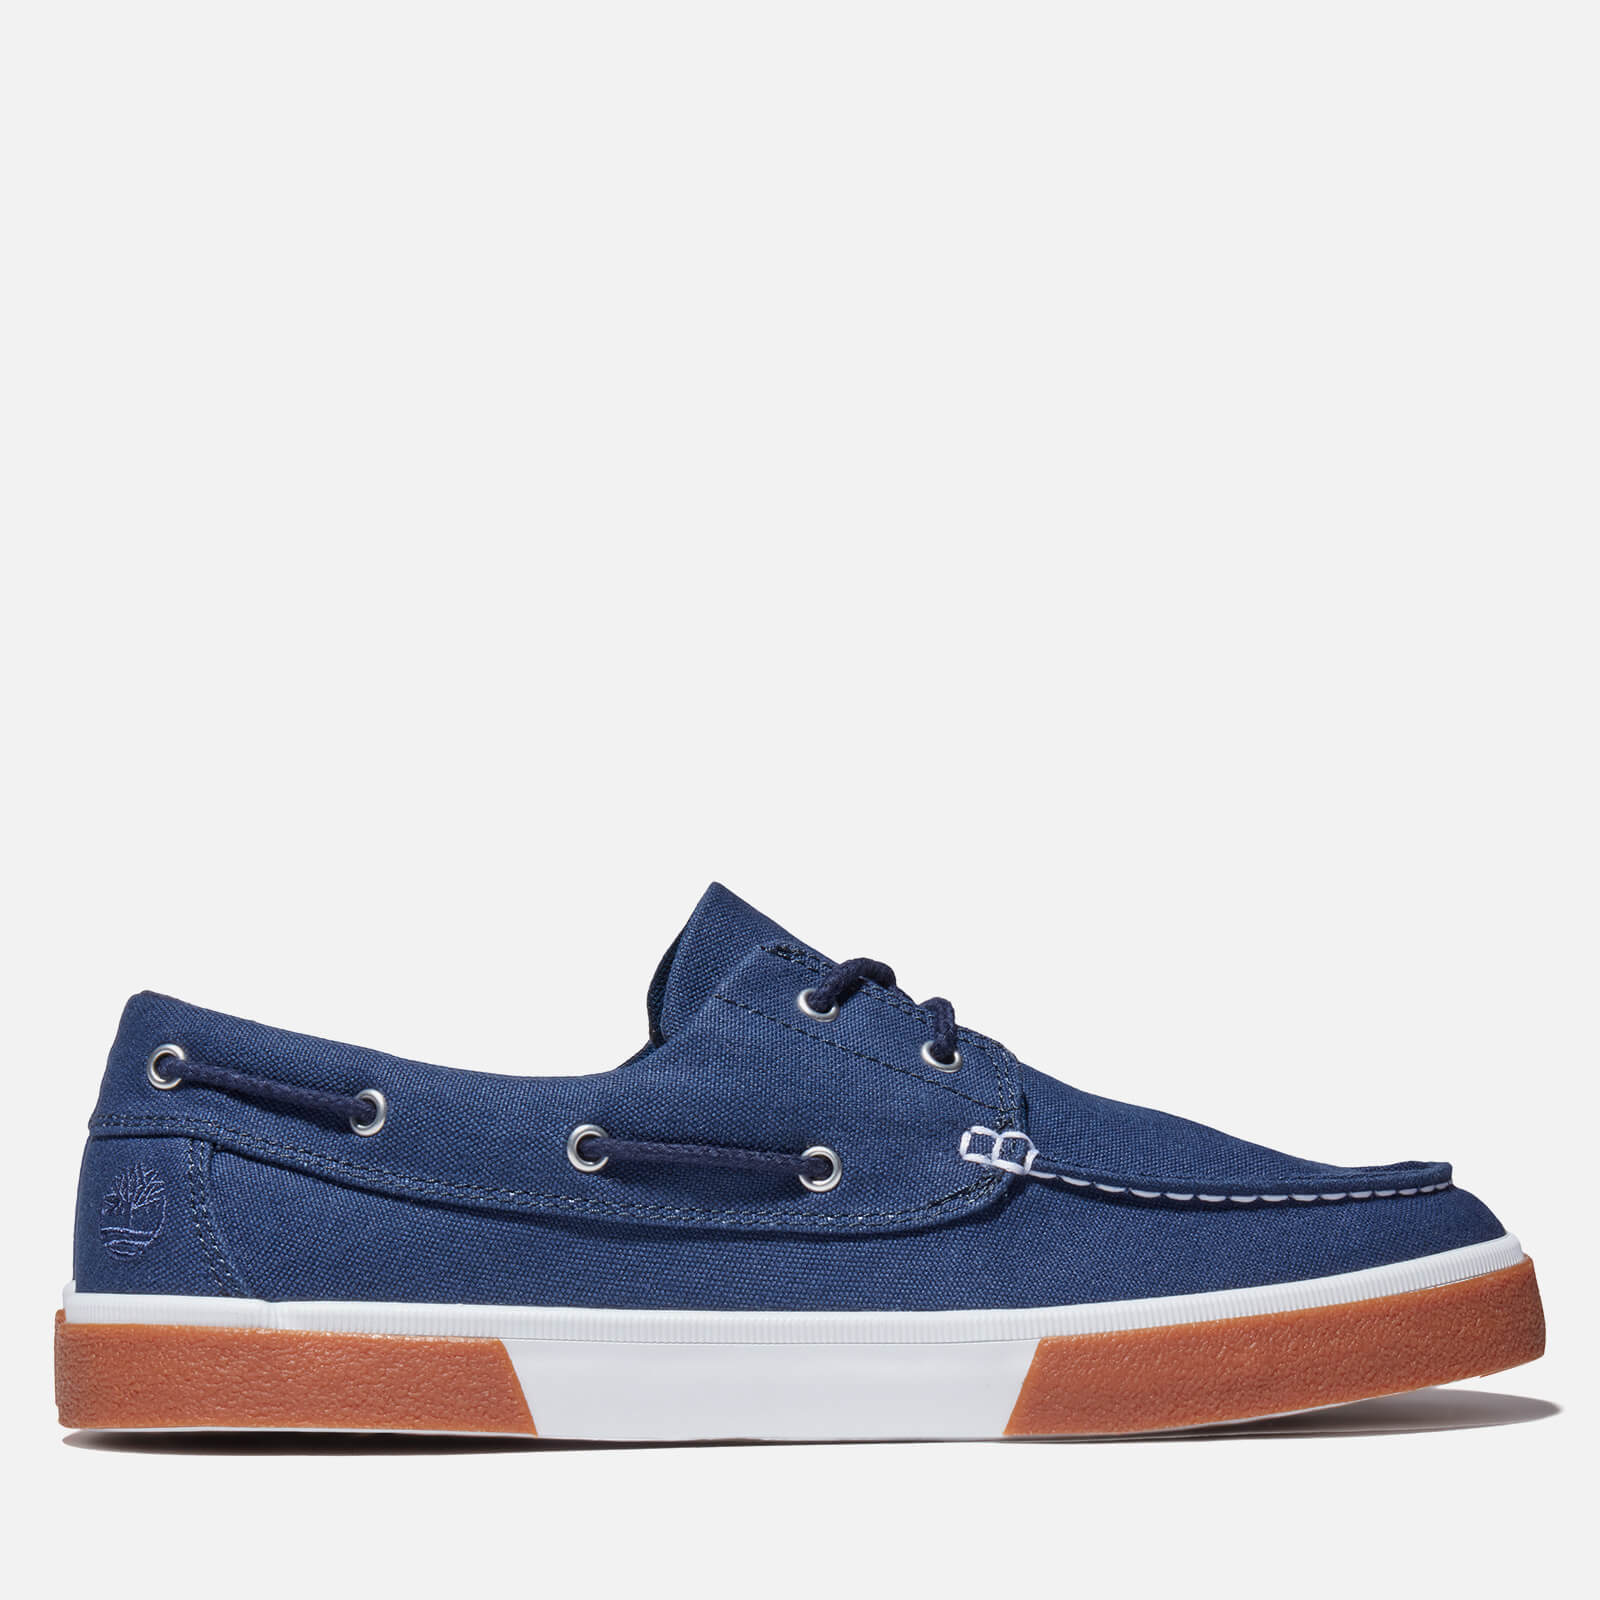 Timberland Men's Union Wharf Canvas Boat Shoes - Navy - UK 7